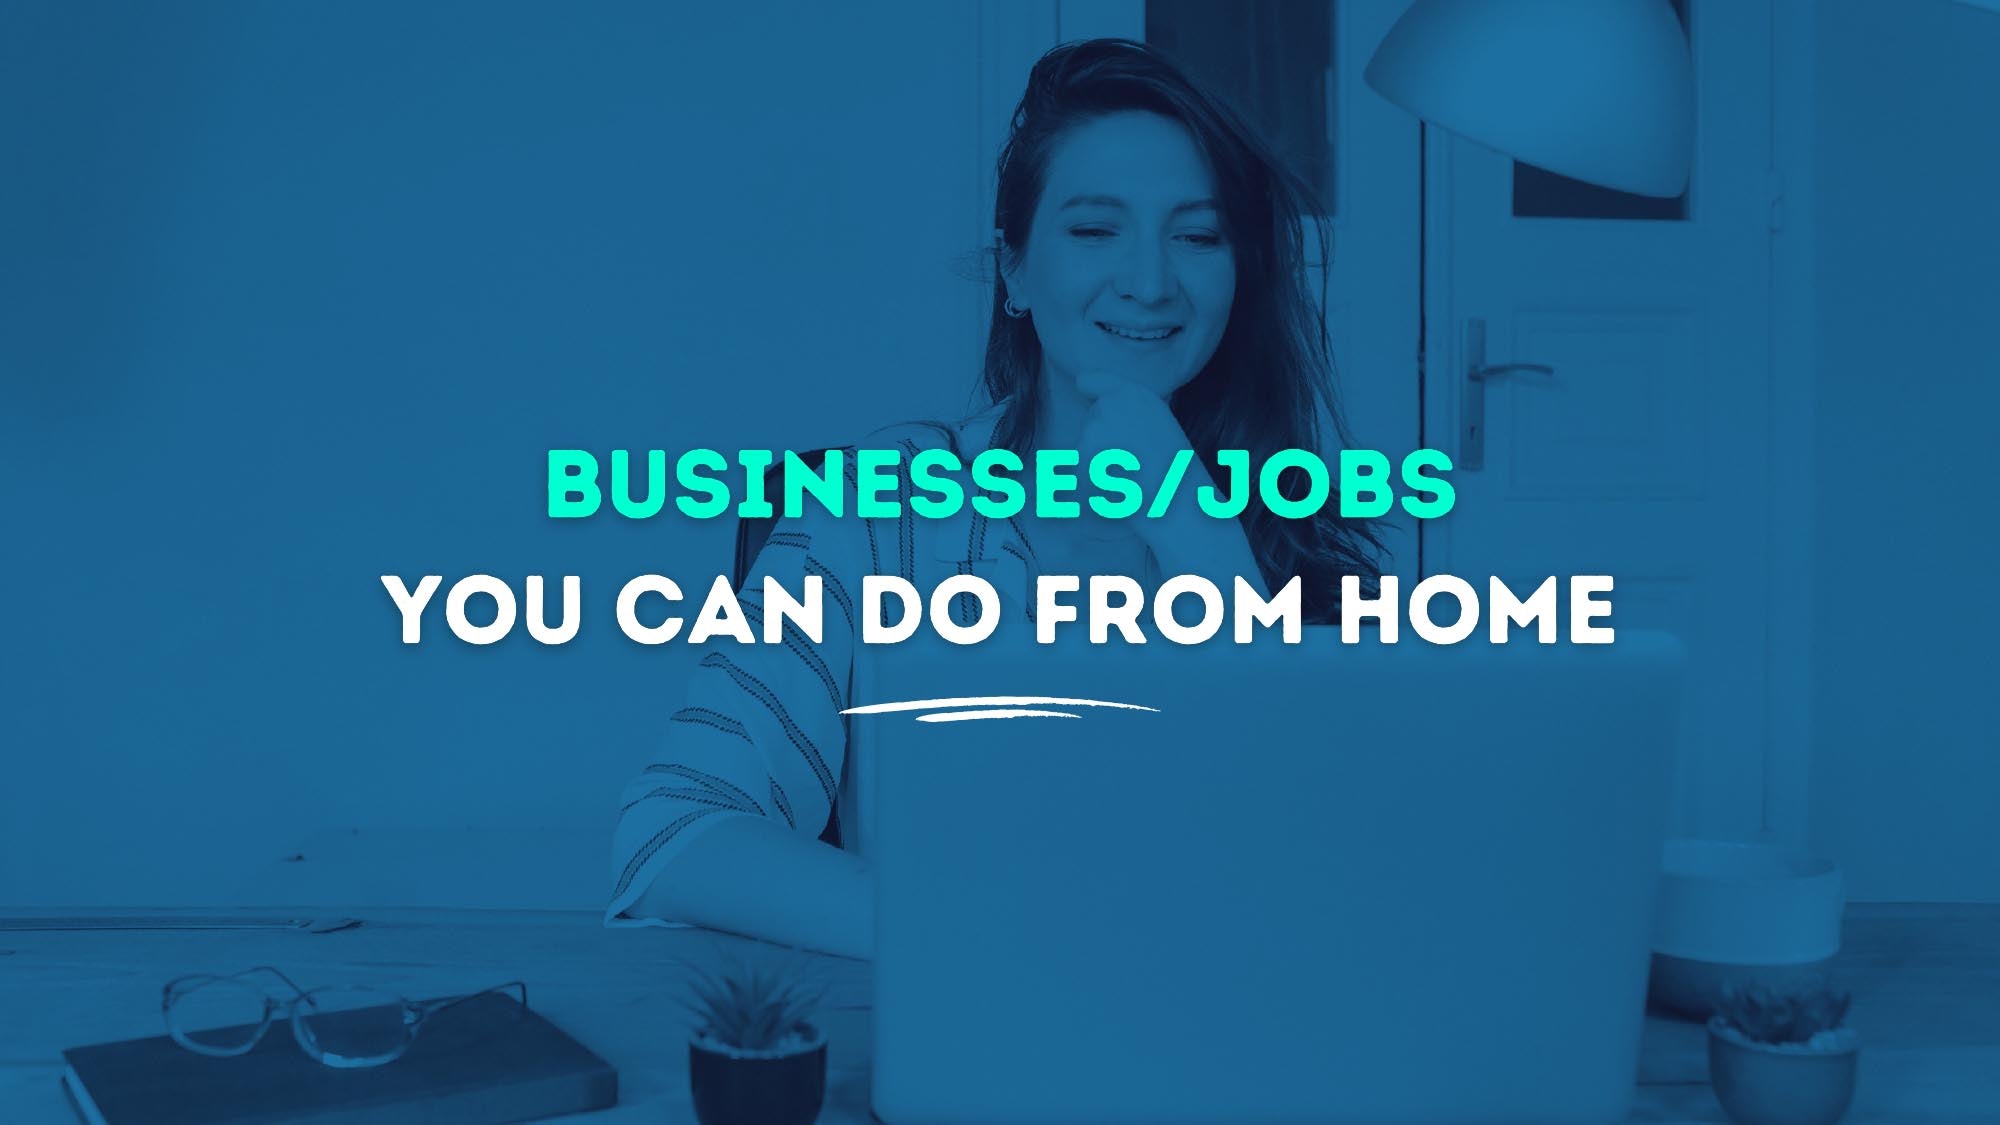 Home Business Ideas: Top 5 Businesses/Jobs You Can Do From Home